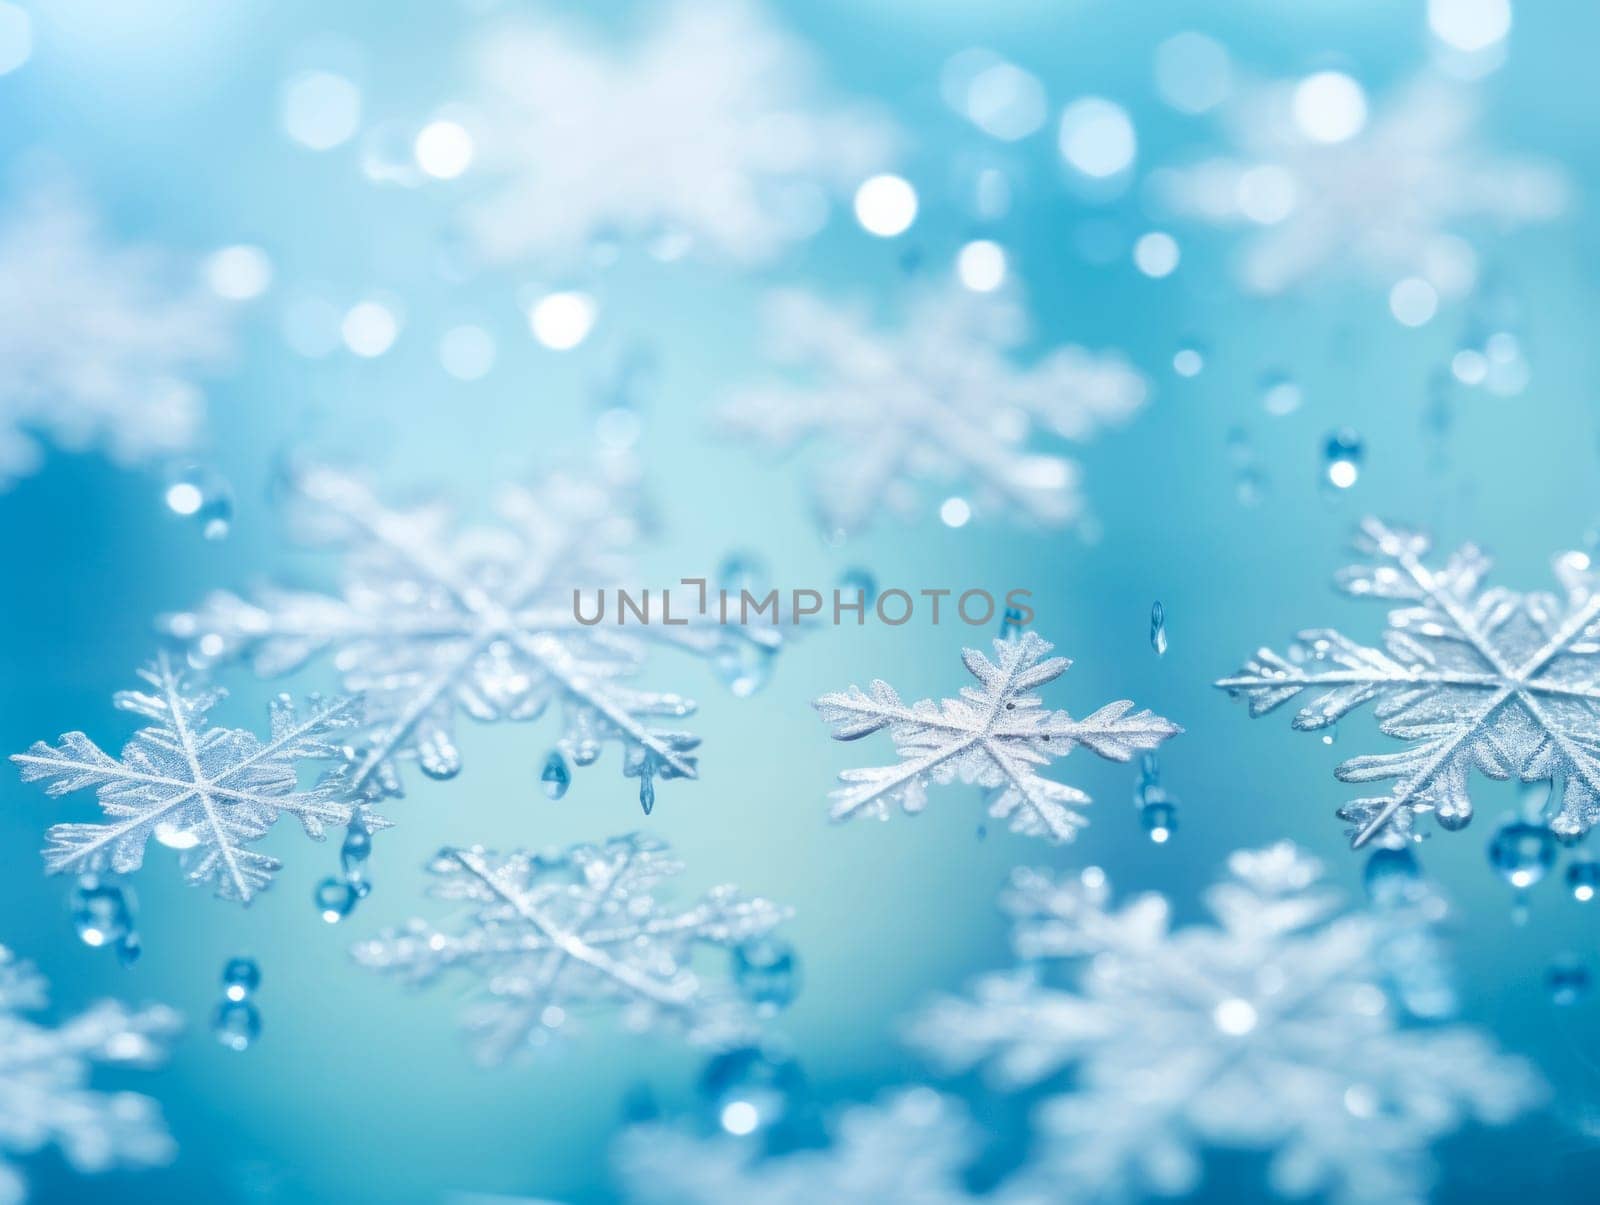 Background of snowflakes in blur by Spirina